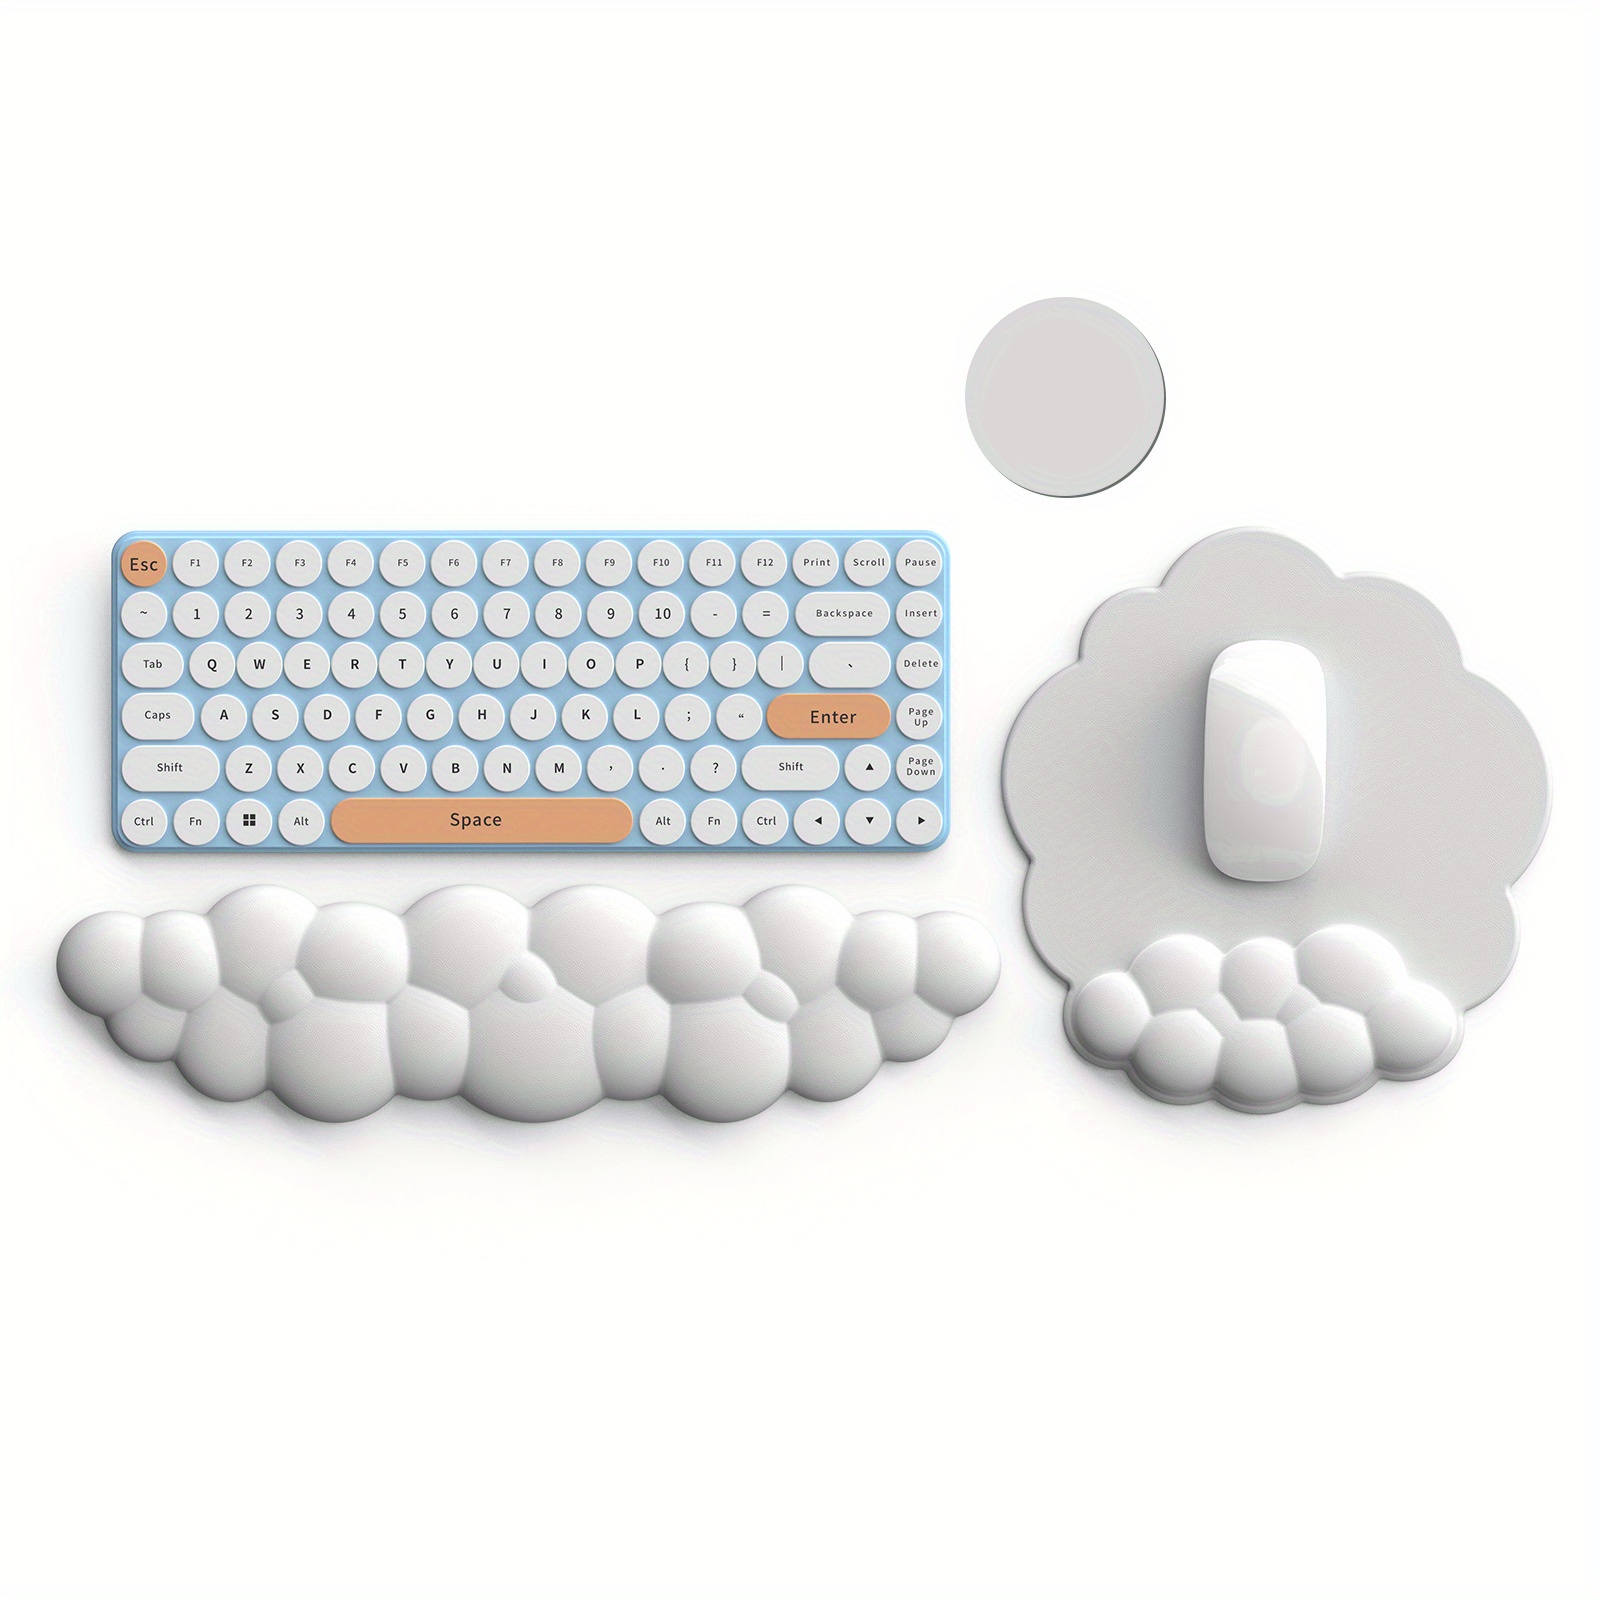     ergonomic mouse pad with memory foam wrist rest - perfect for computer, laptop, gaming & home office! white 0